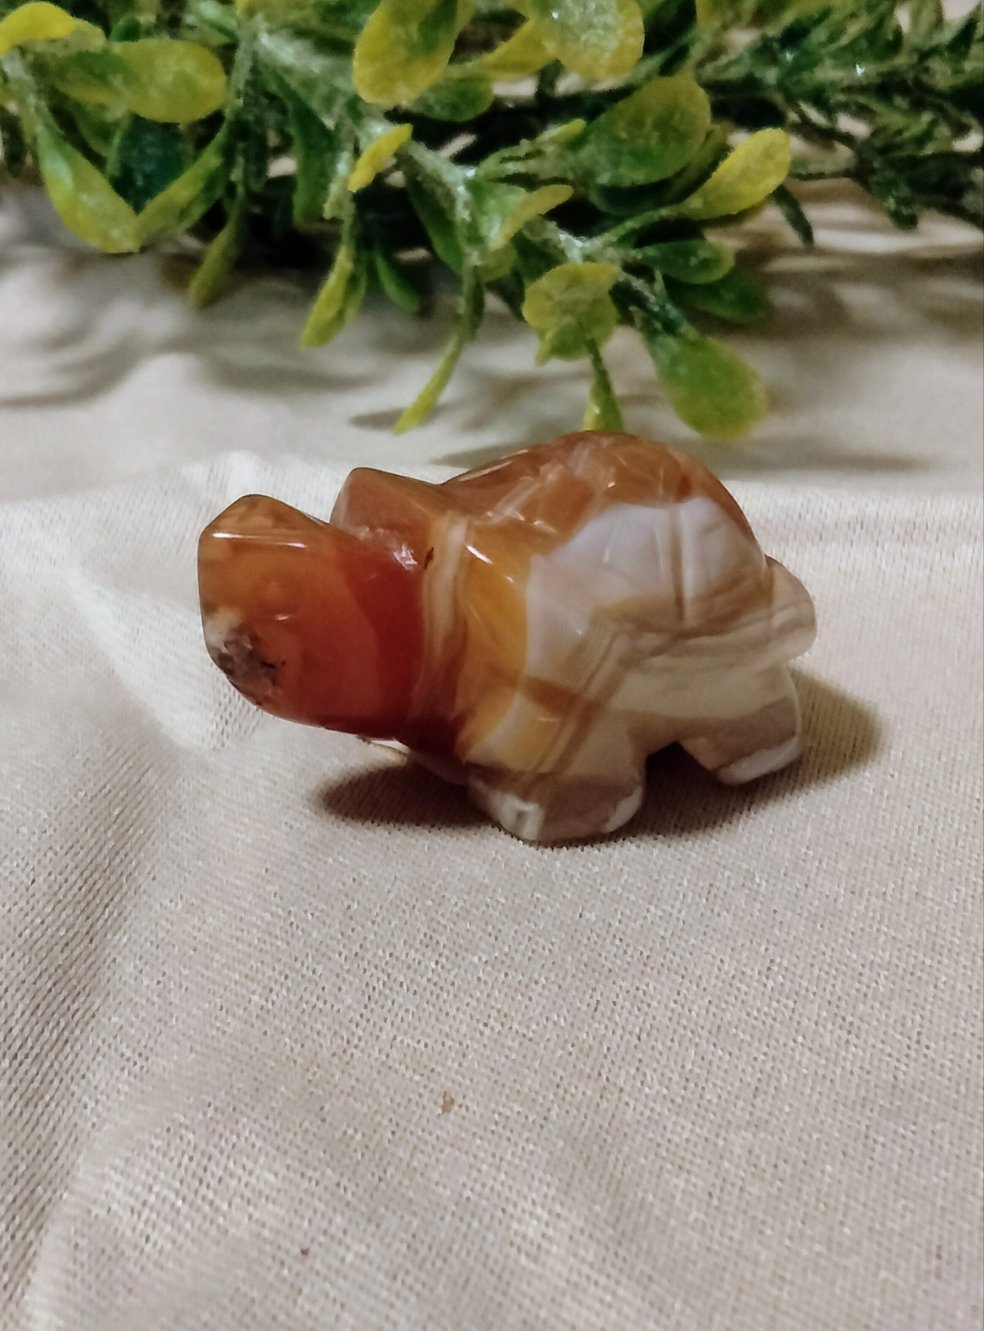 Turtle Crystal Carving - Moonsence